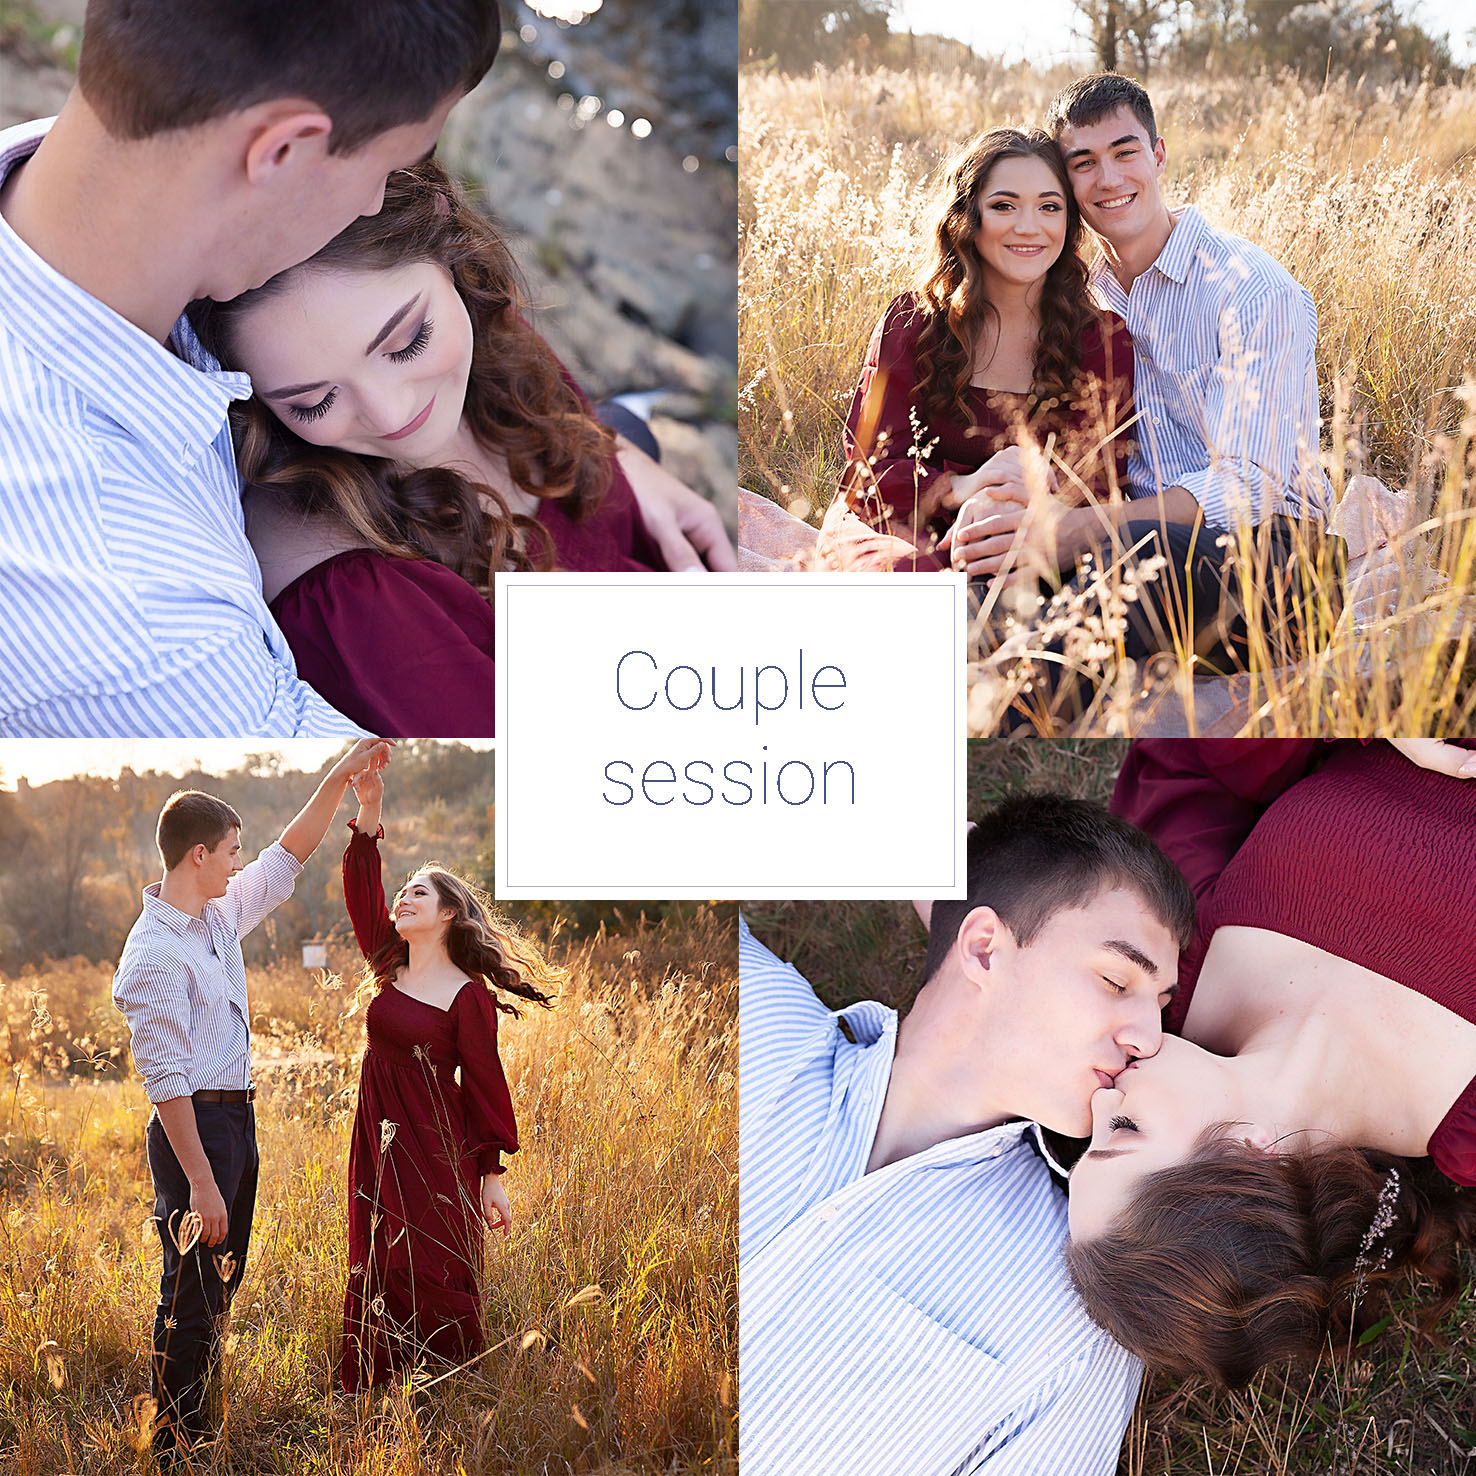 Jordan and Werner – Couple Session